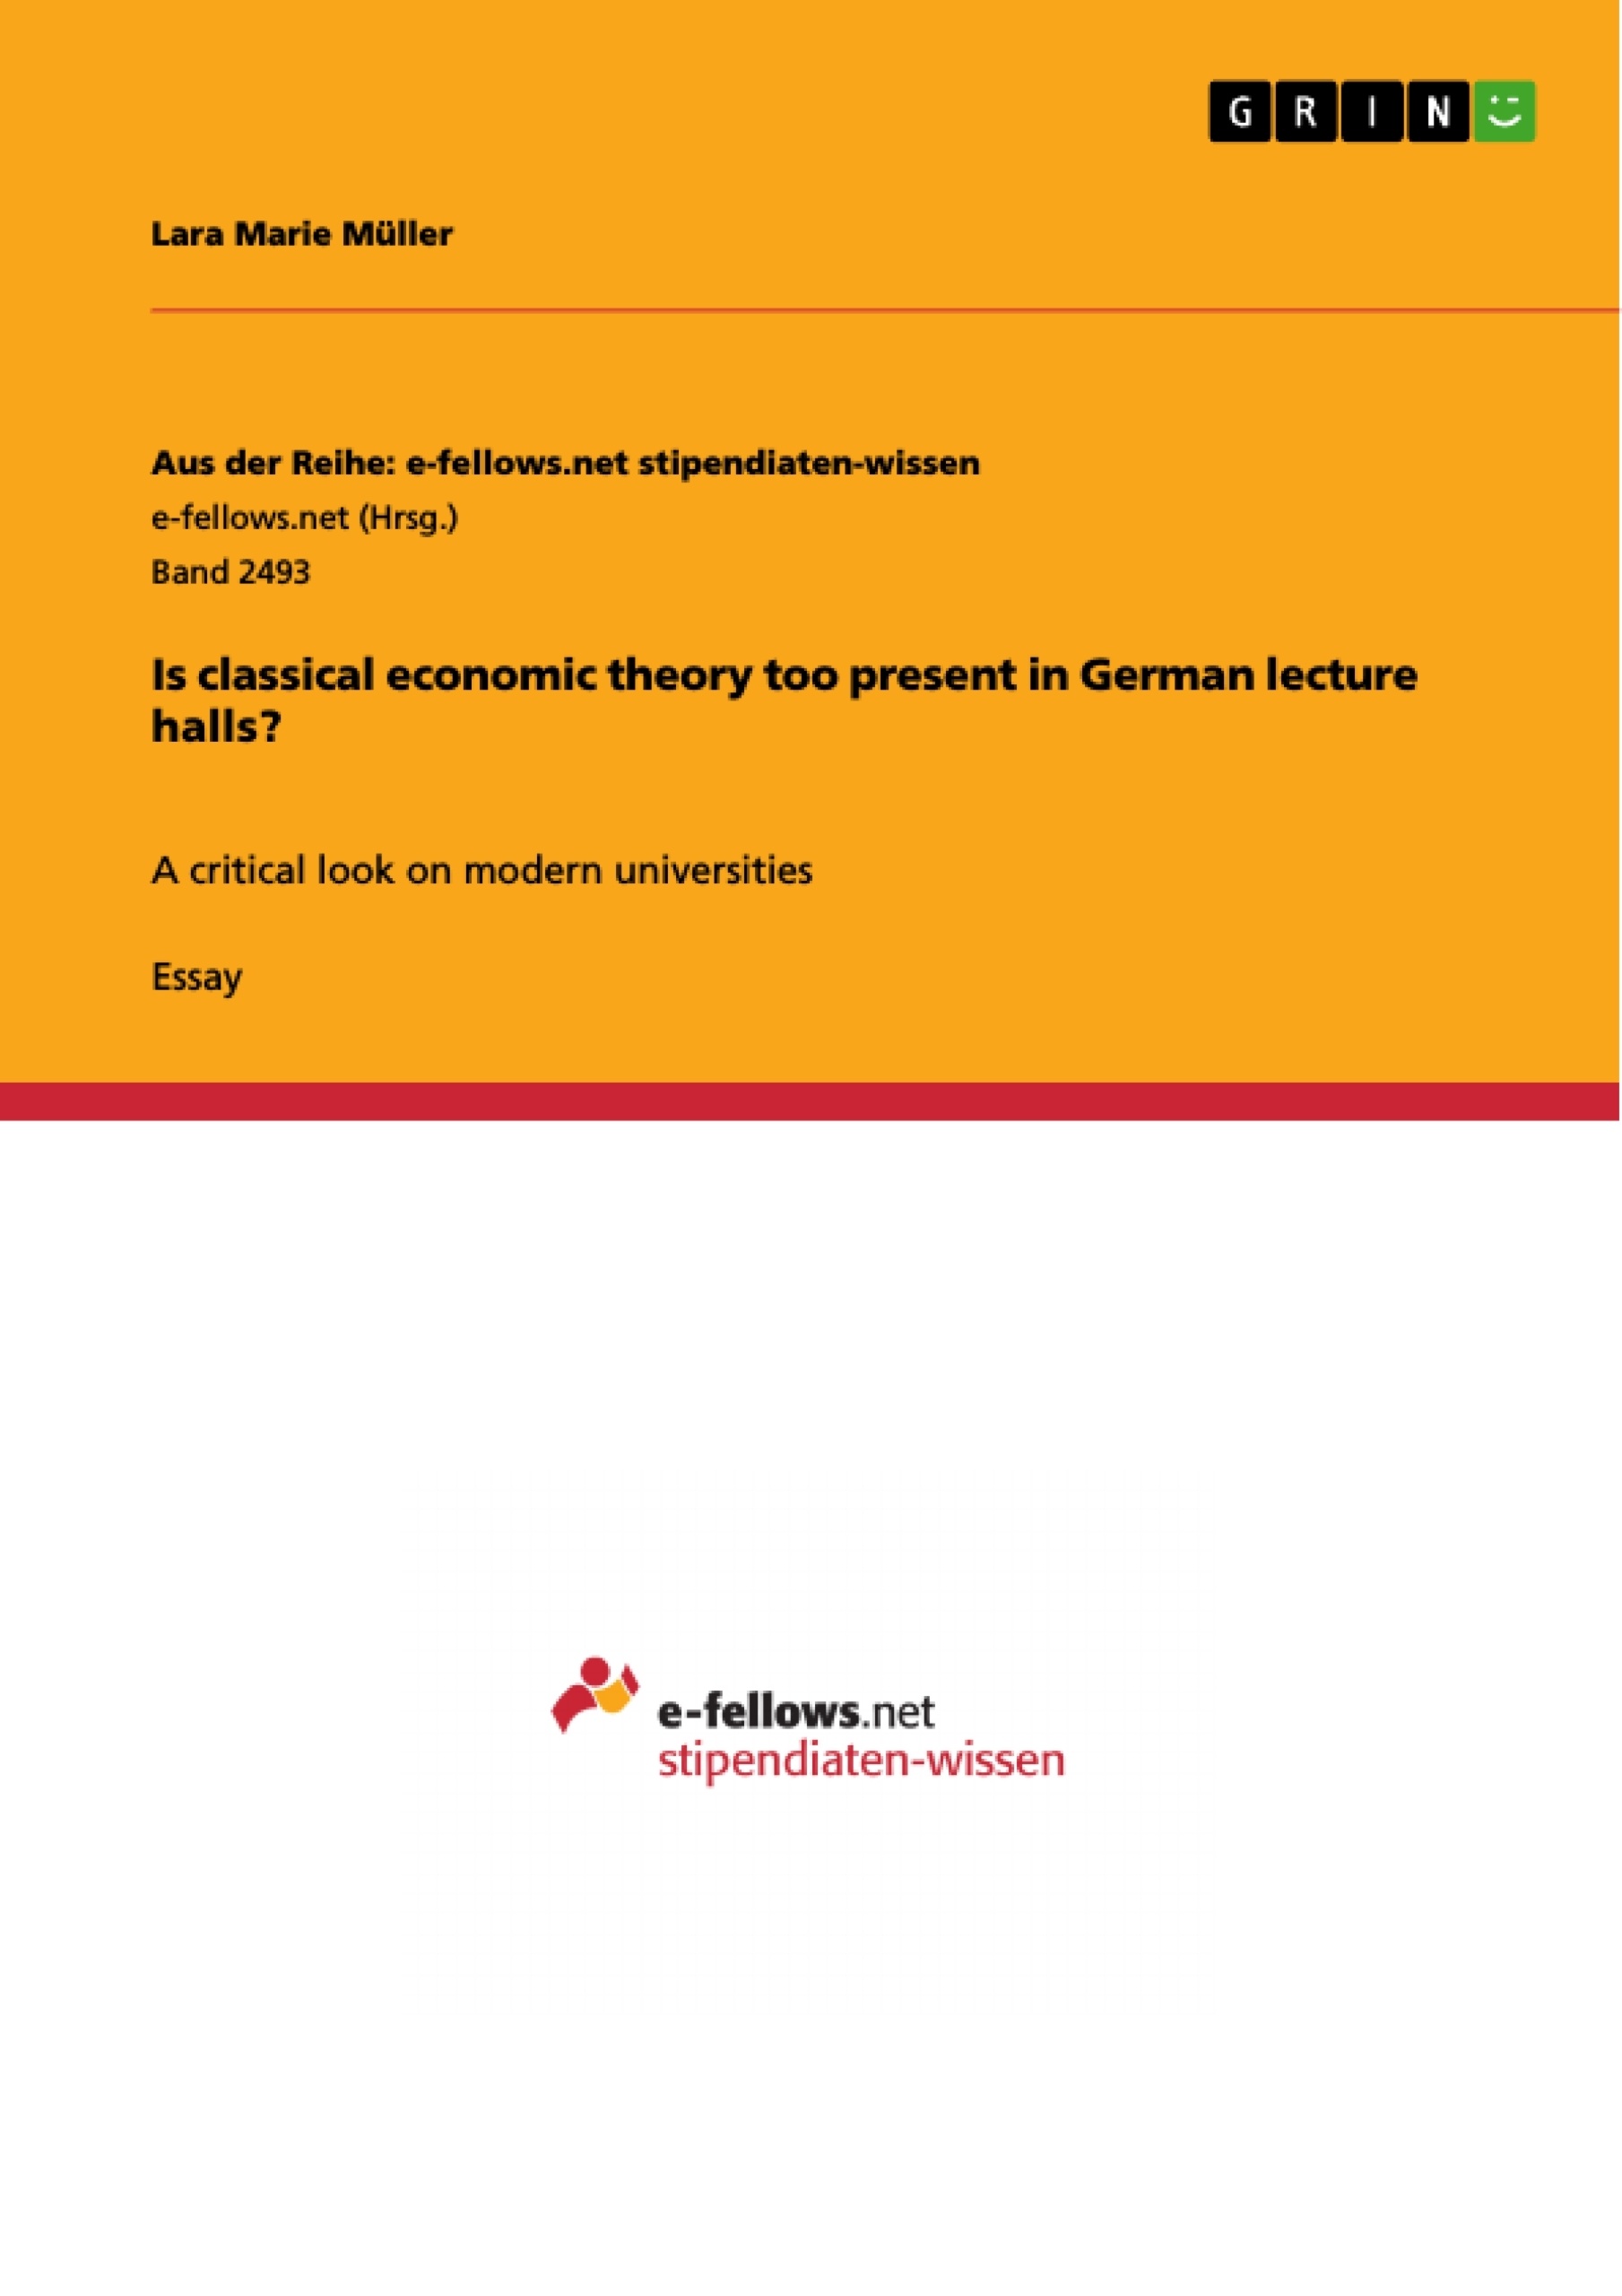 Titre: Is classical economic theory too present in German lecture halls?